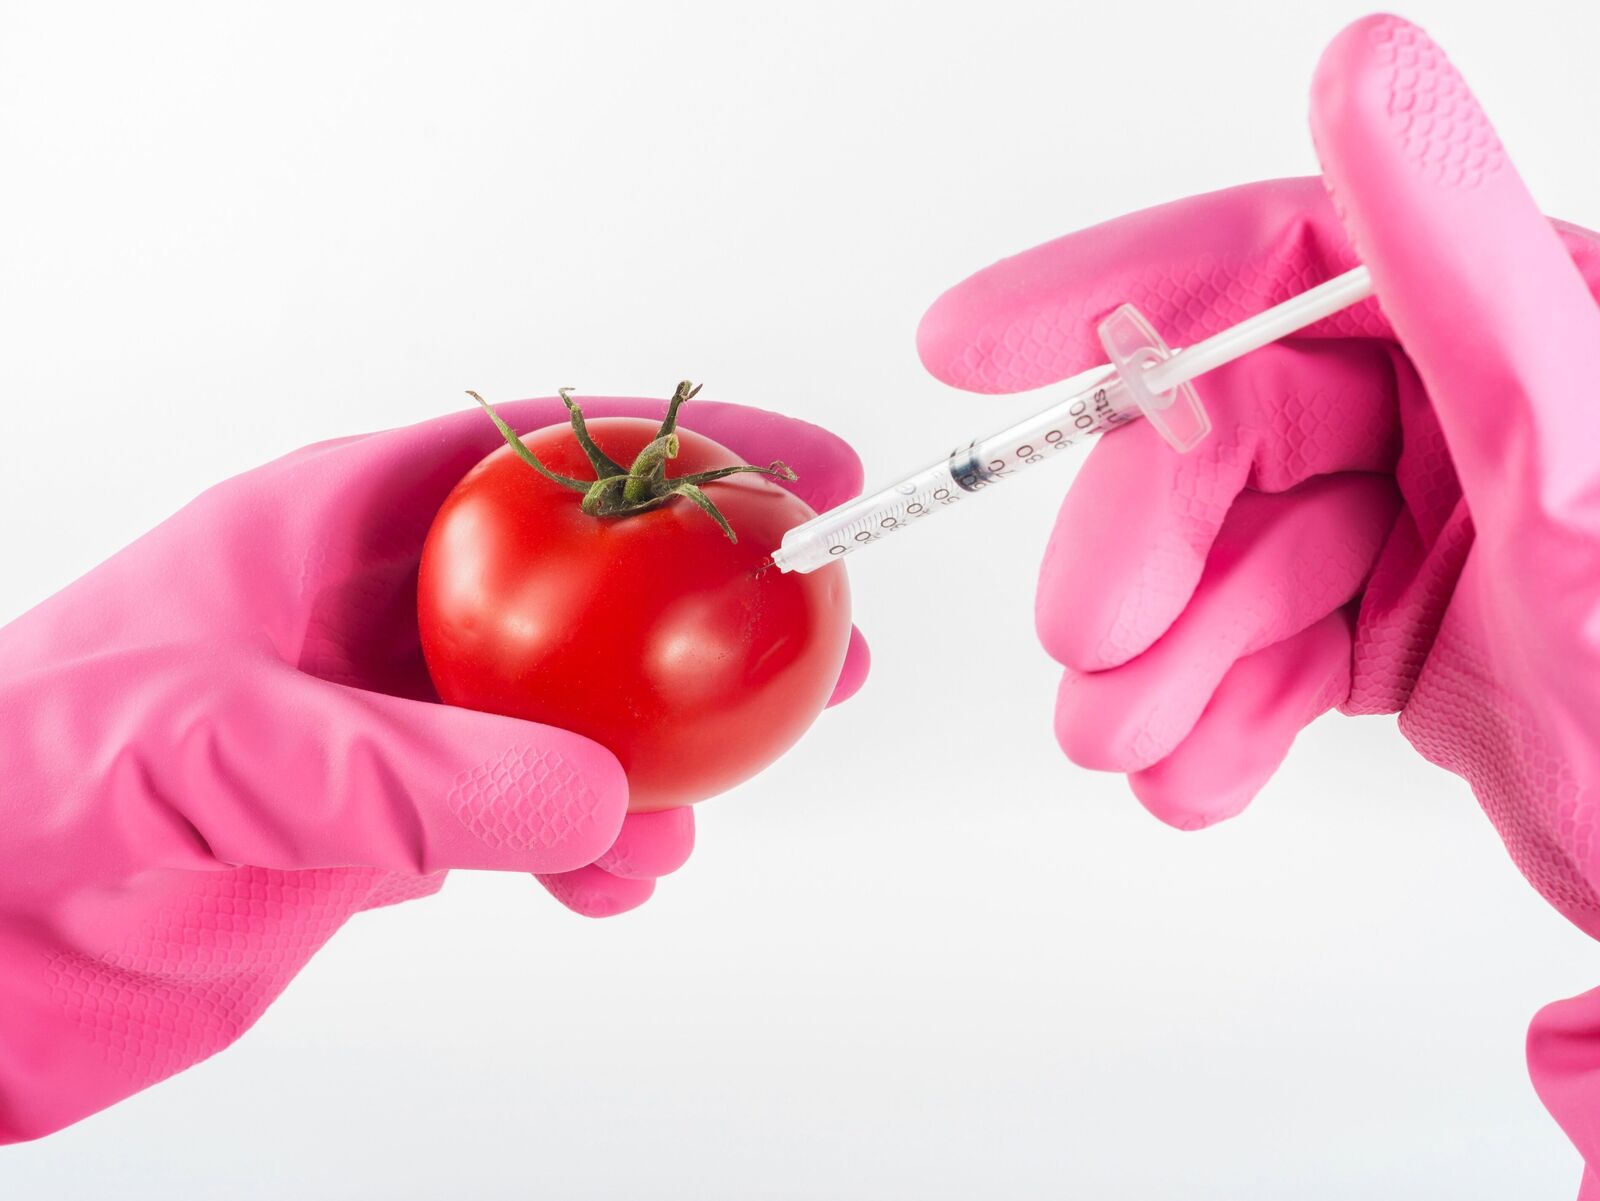 Hands with pink gloves injecting a tomato